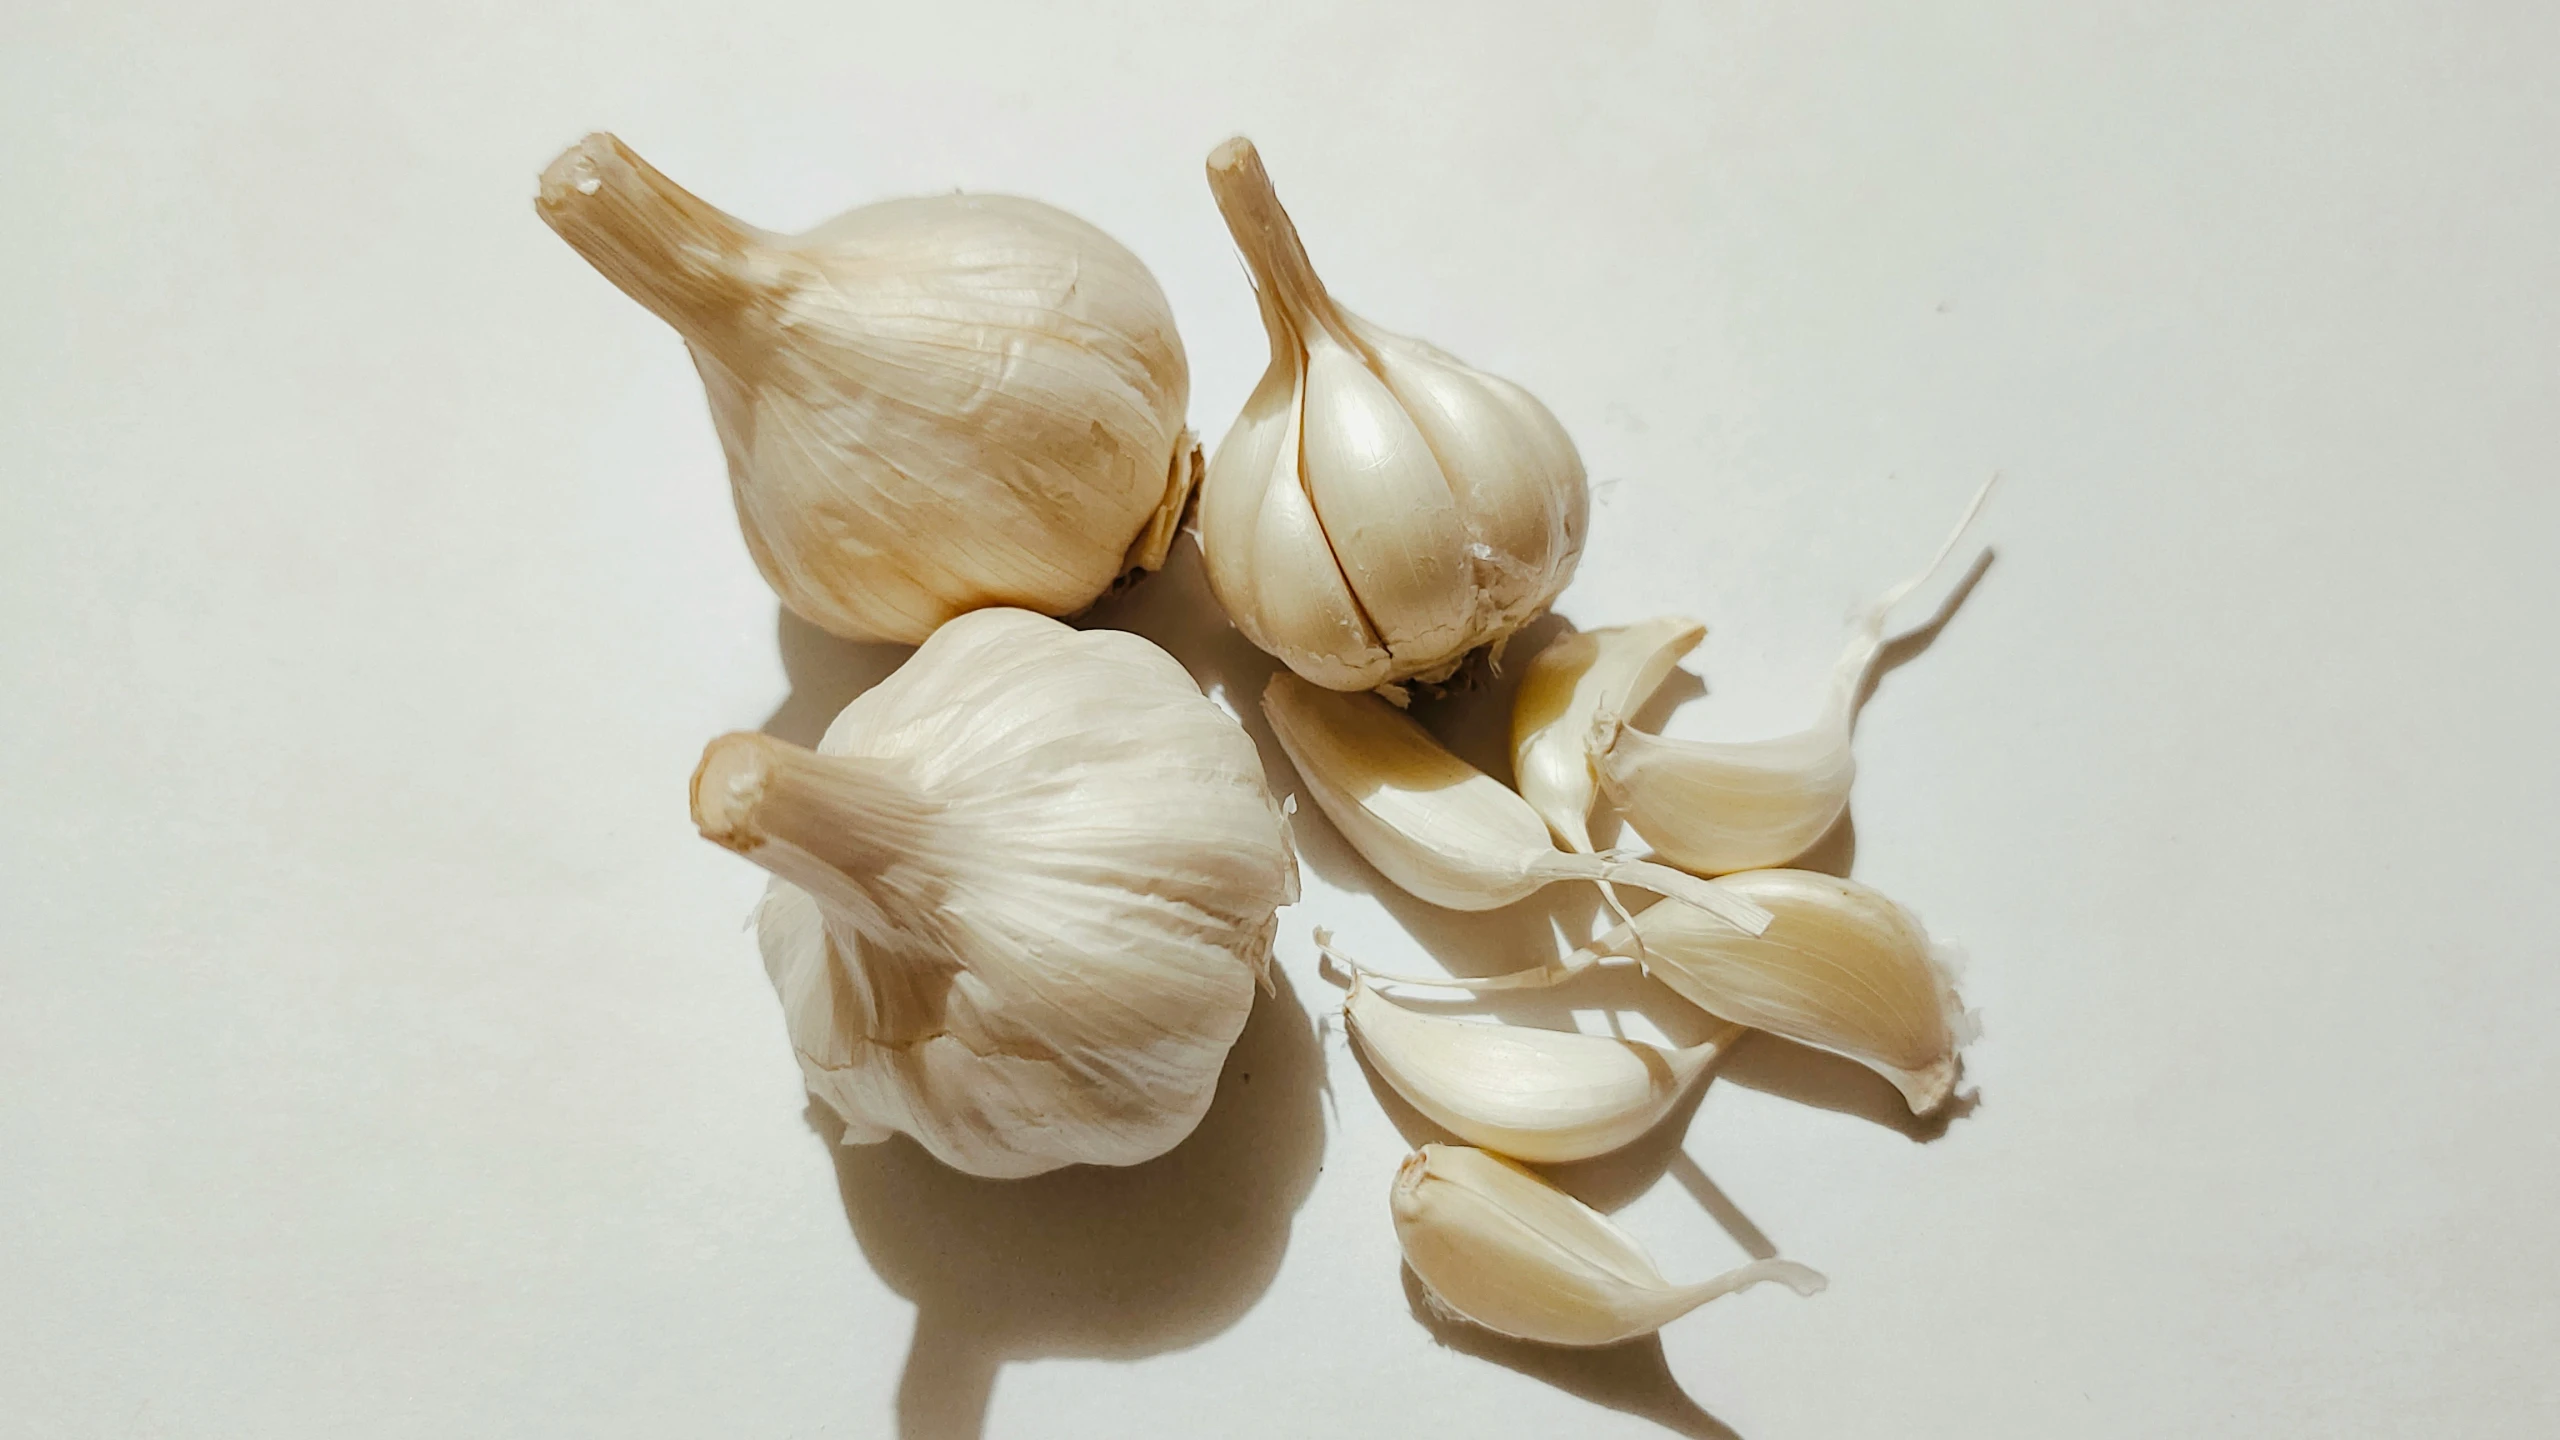 the garlic has just came out of it